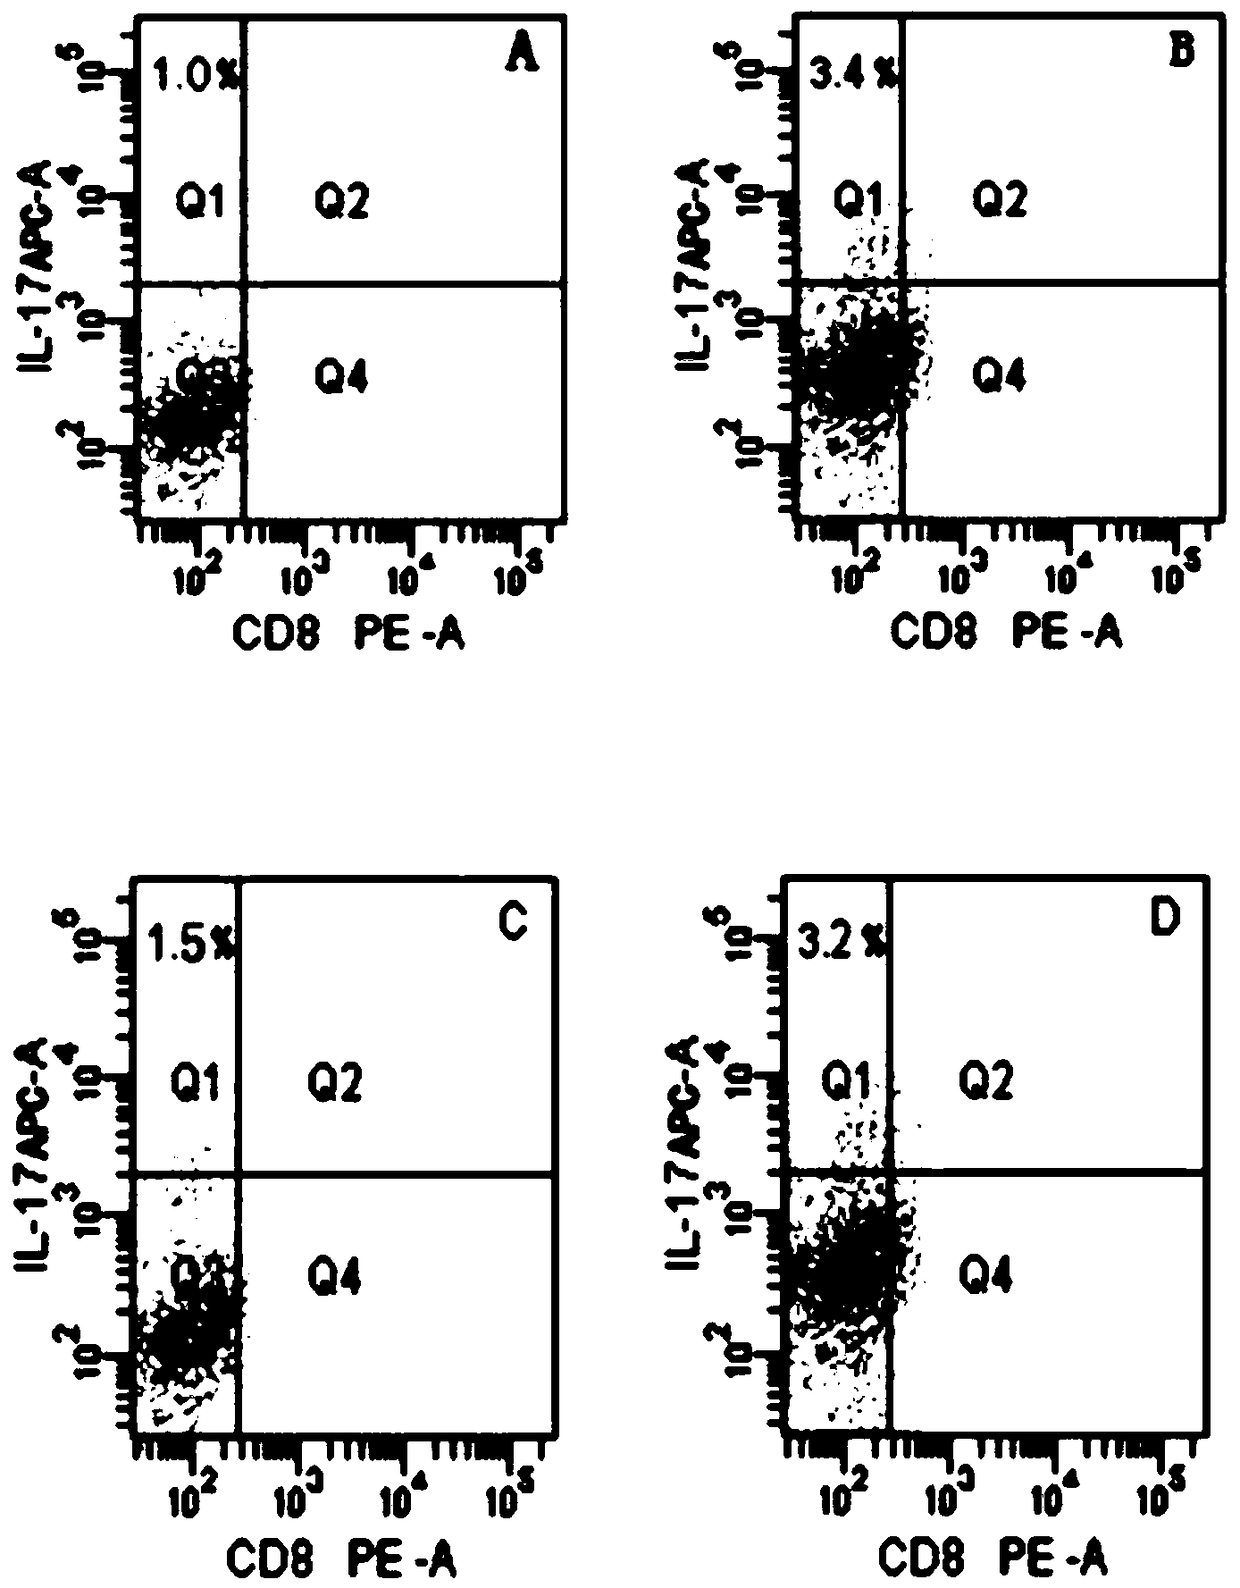 Interference sequence of IL-17 gene closely related to primary nephrotic syndrome podocyte injury